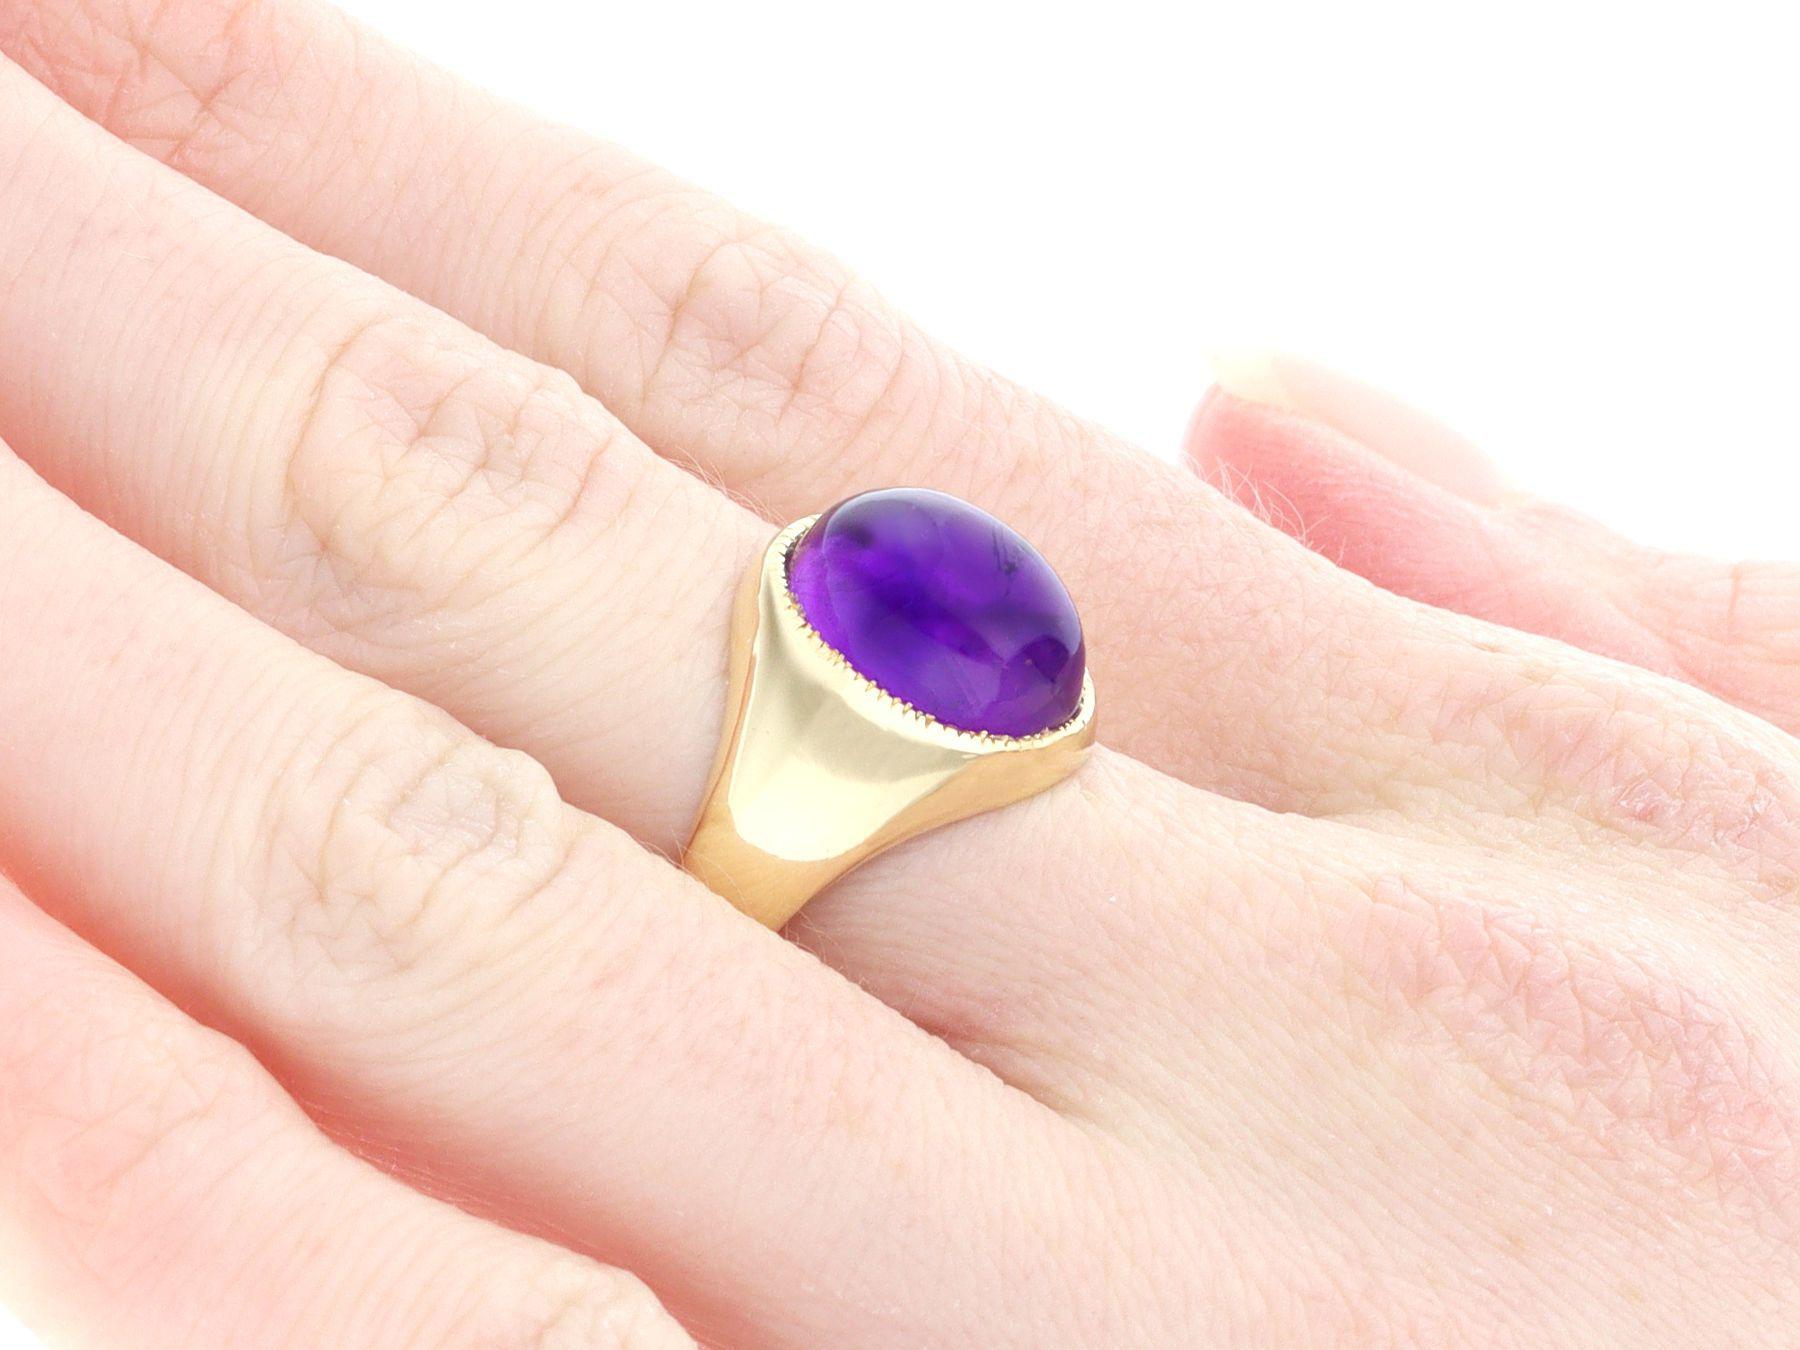 Antique 1936 4.33 Carat Amethyst and Yellow Gold Signet Ring In Excellent Condition For Sale In Jesmond, Newcastle Upon Tyne